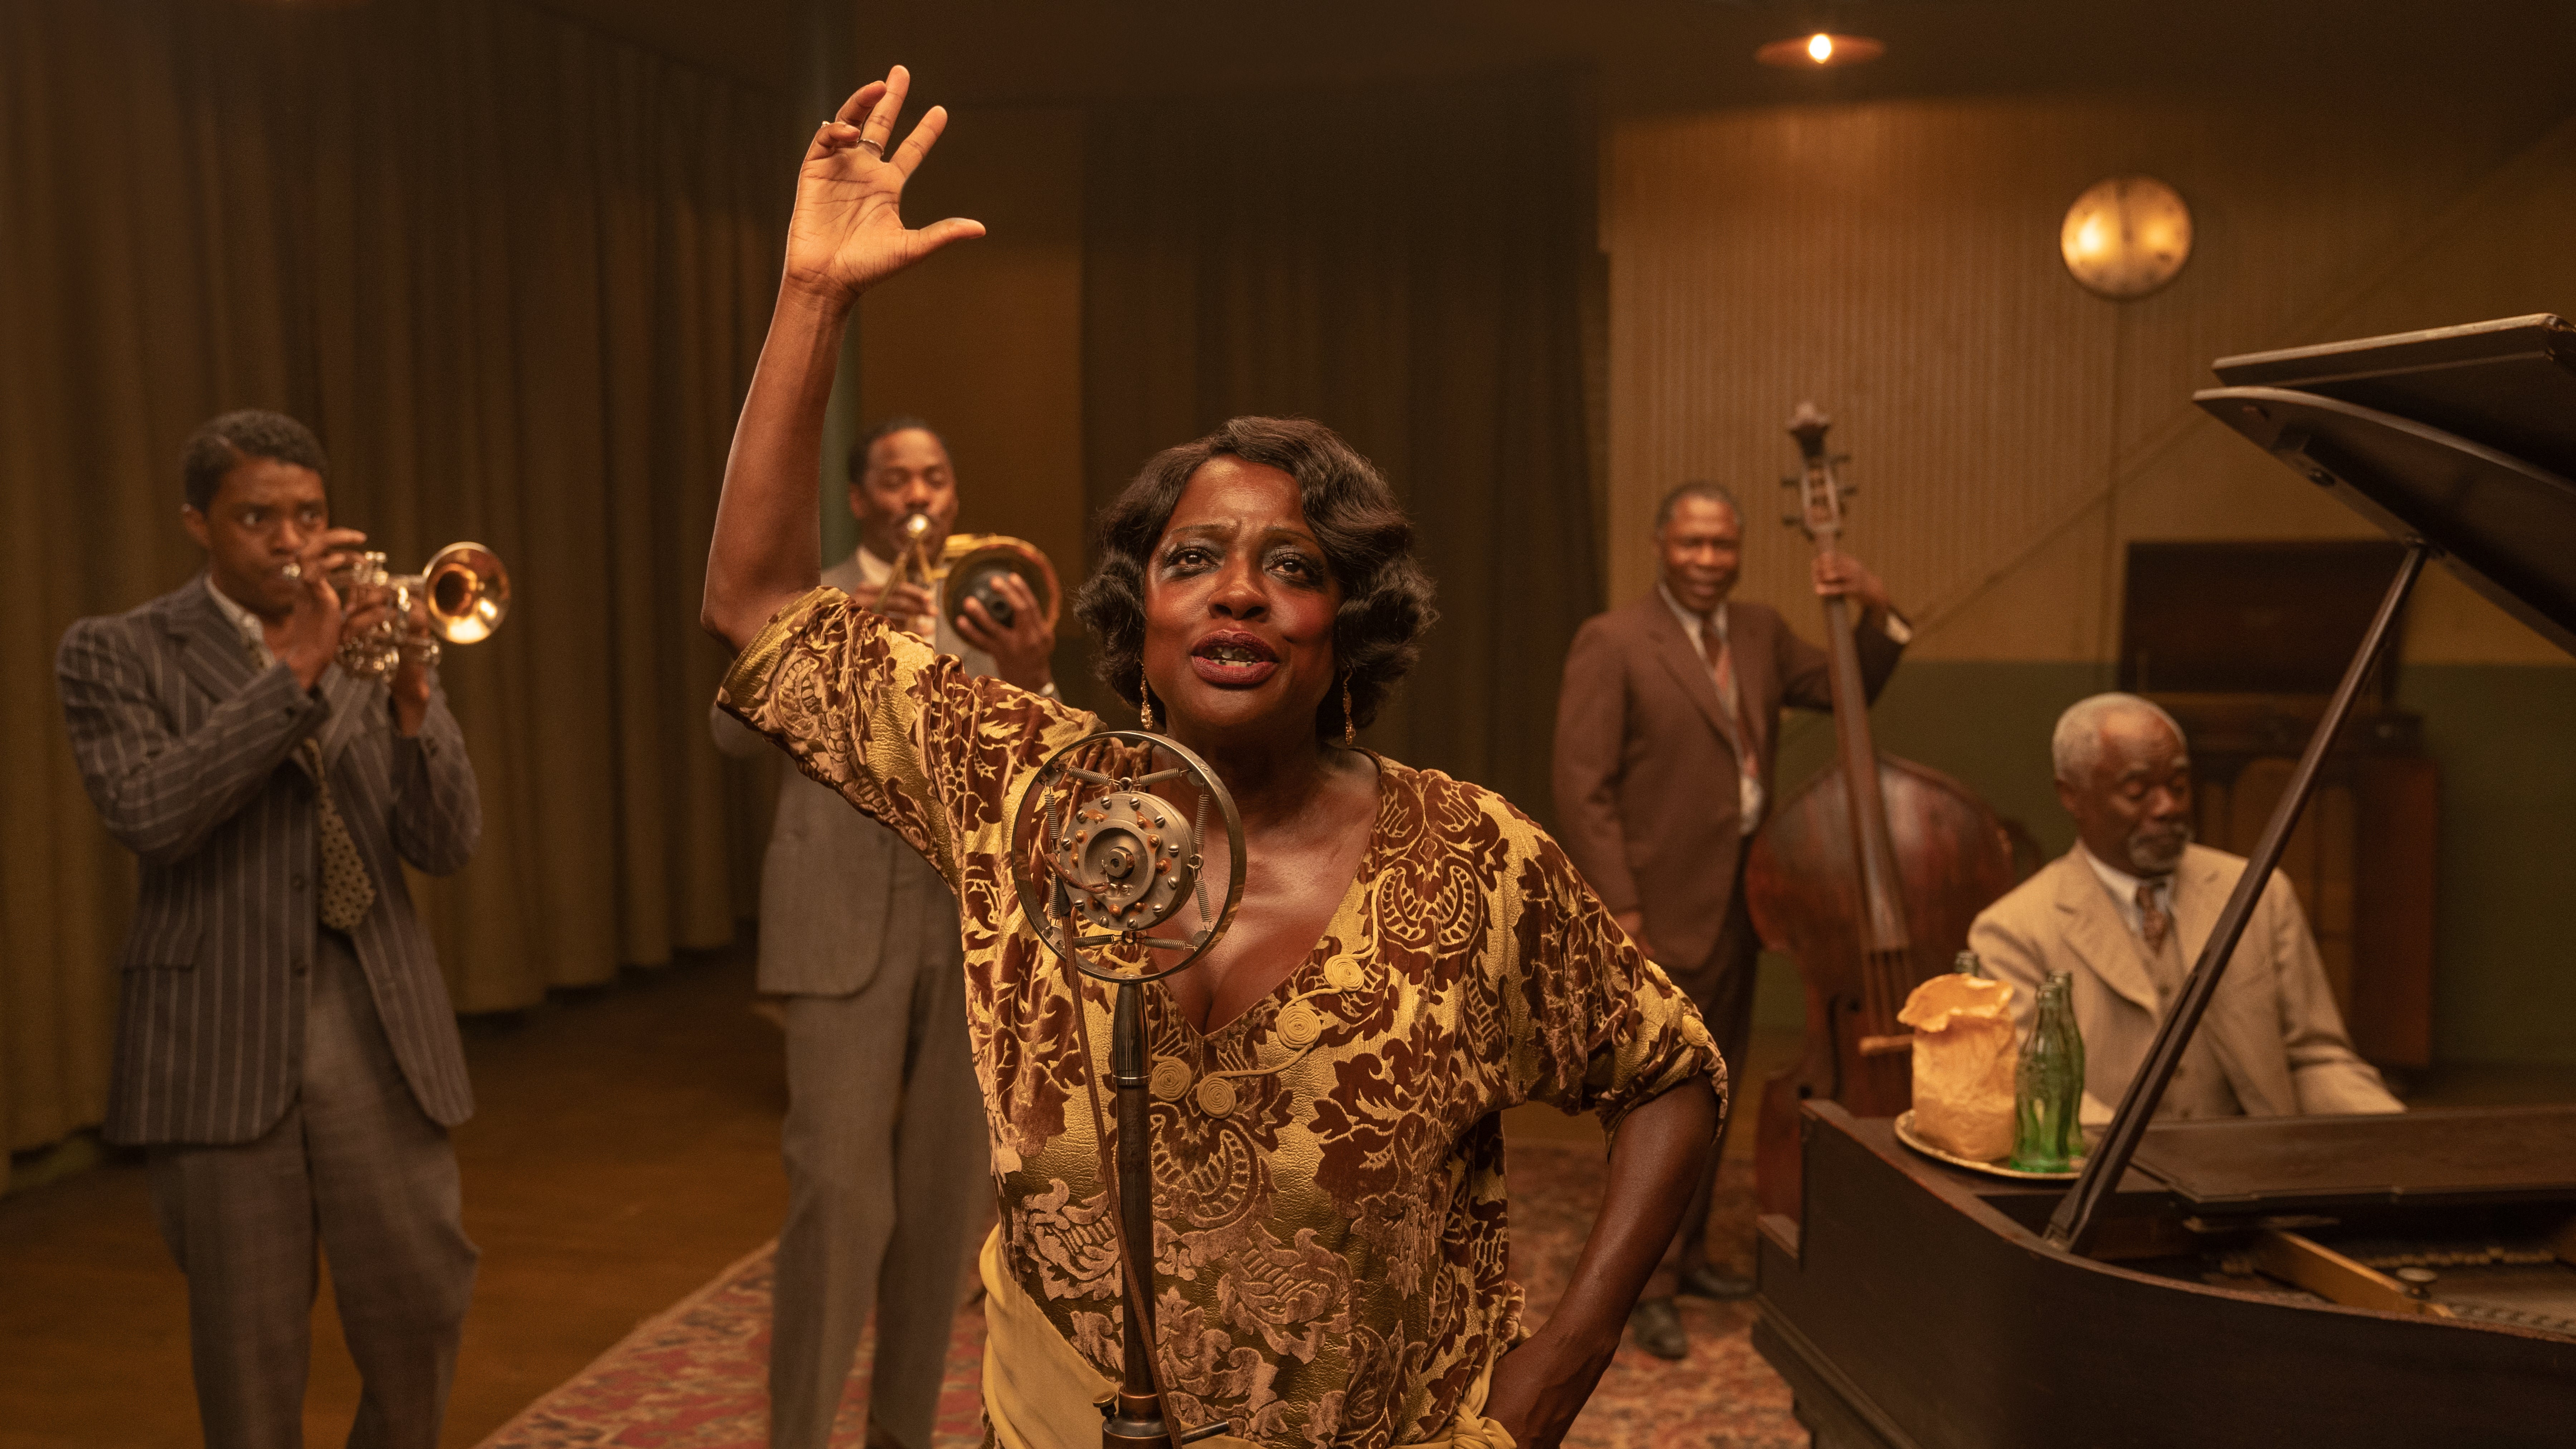 Viola Davis, as Ma Rainey, burns through the pageantry, her ferocity only dulled by the occasional wave of exhaustion